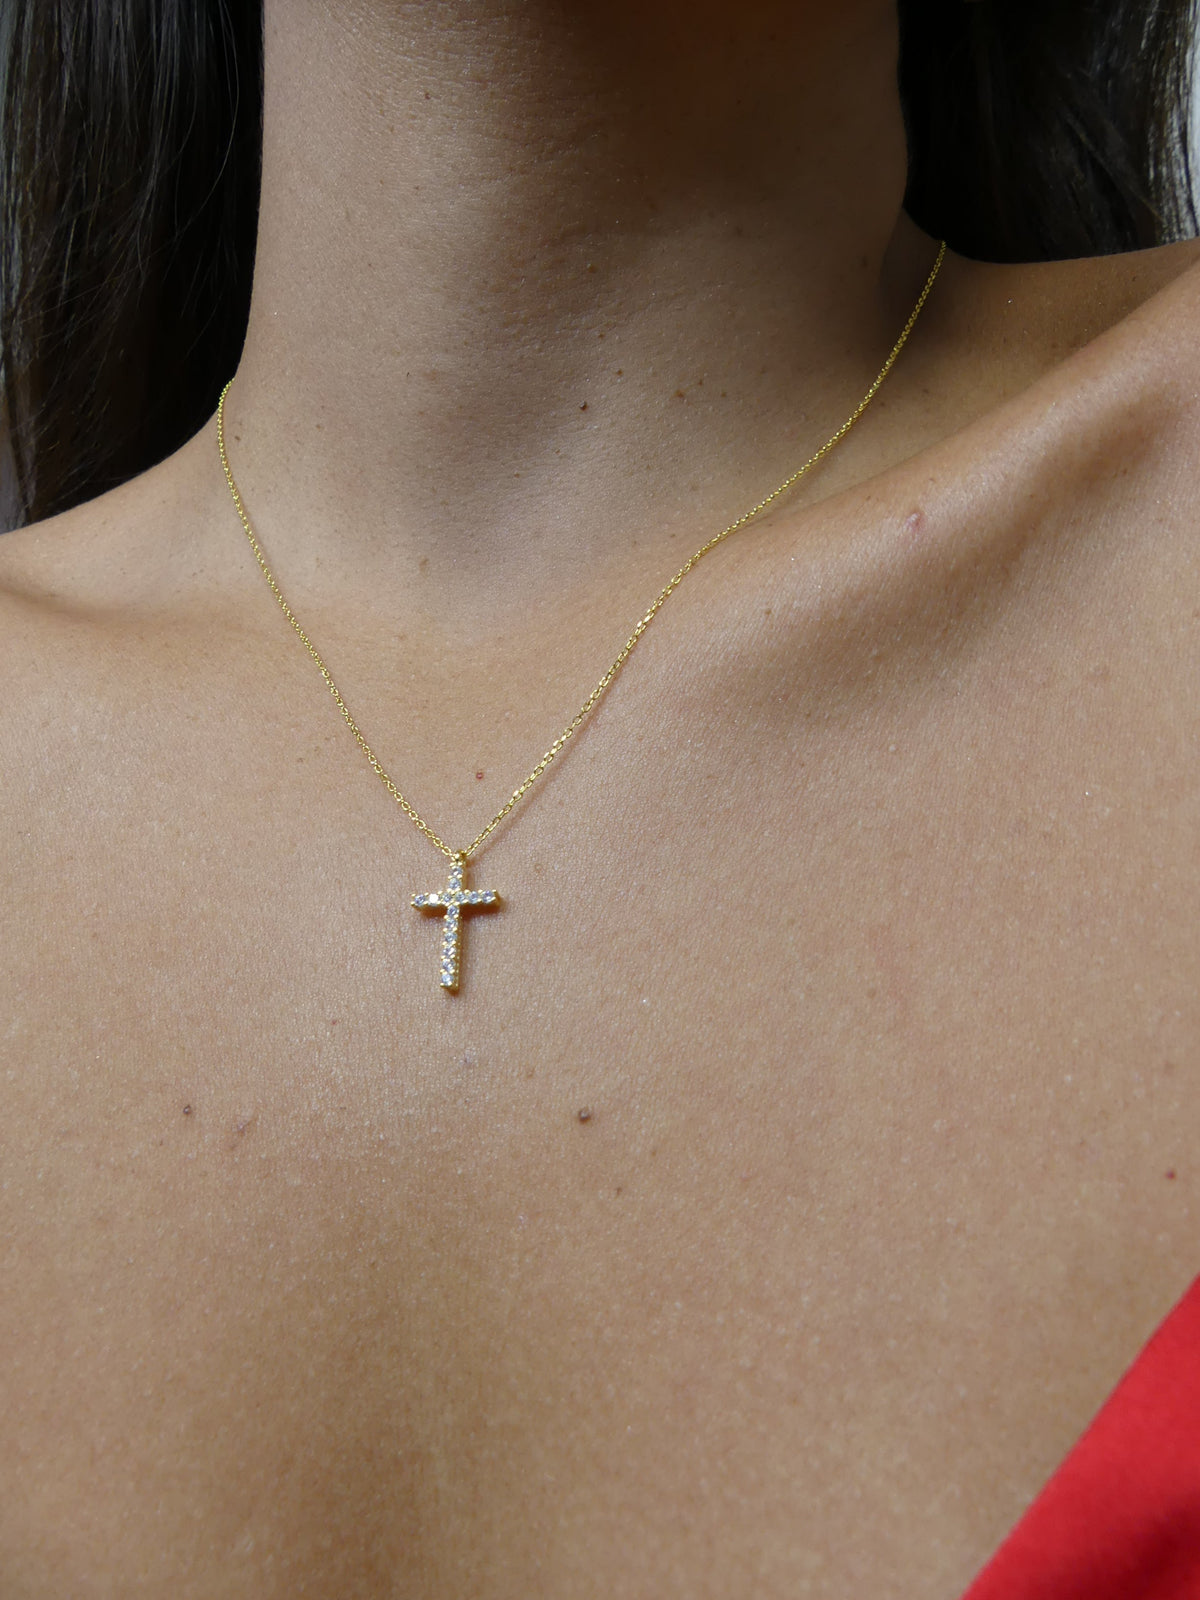 gold cross necklace 18k gold plated with diamonds zircon, fake diamond necklace that looks real waterproof for sensitive skin trending cross necklaces , gift ideas for men and woman. Nice necklaces religious for cheap good quality Kesley Boutique